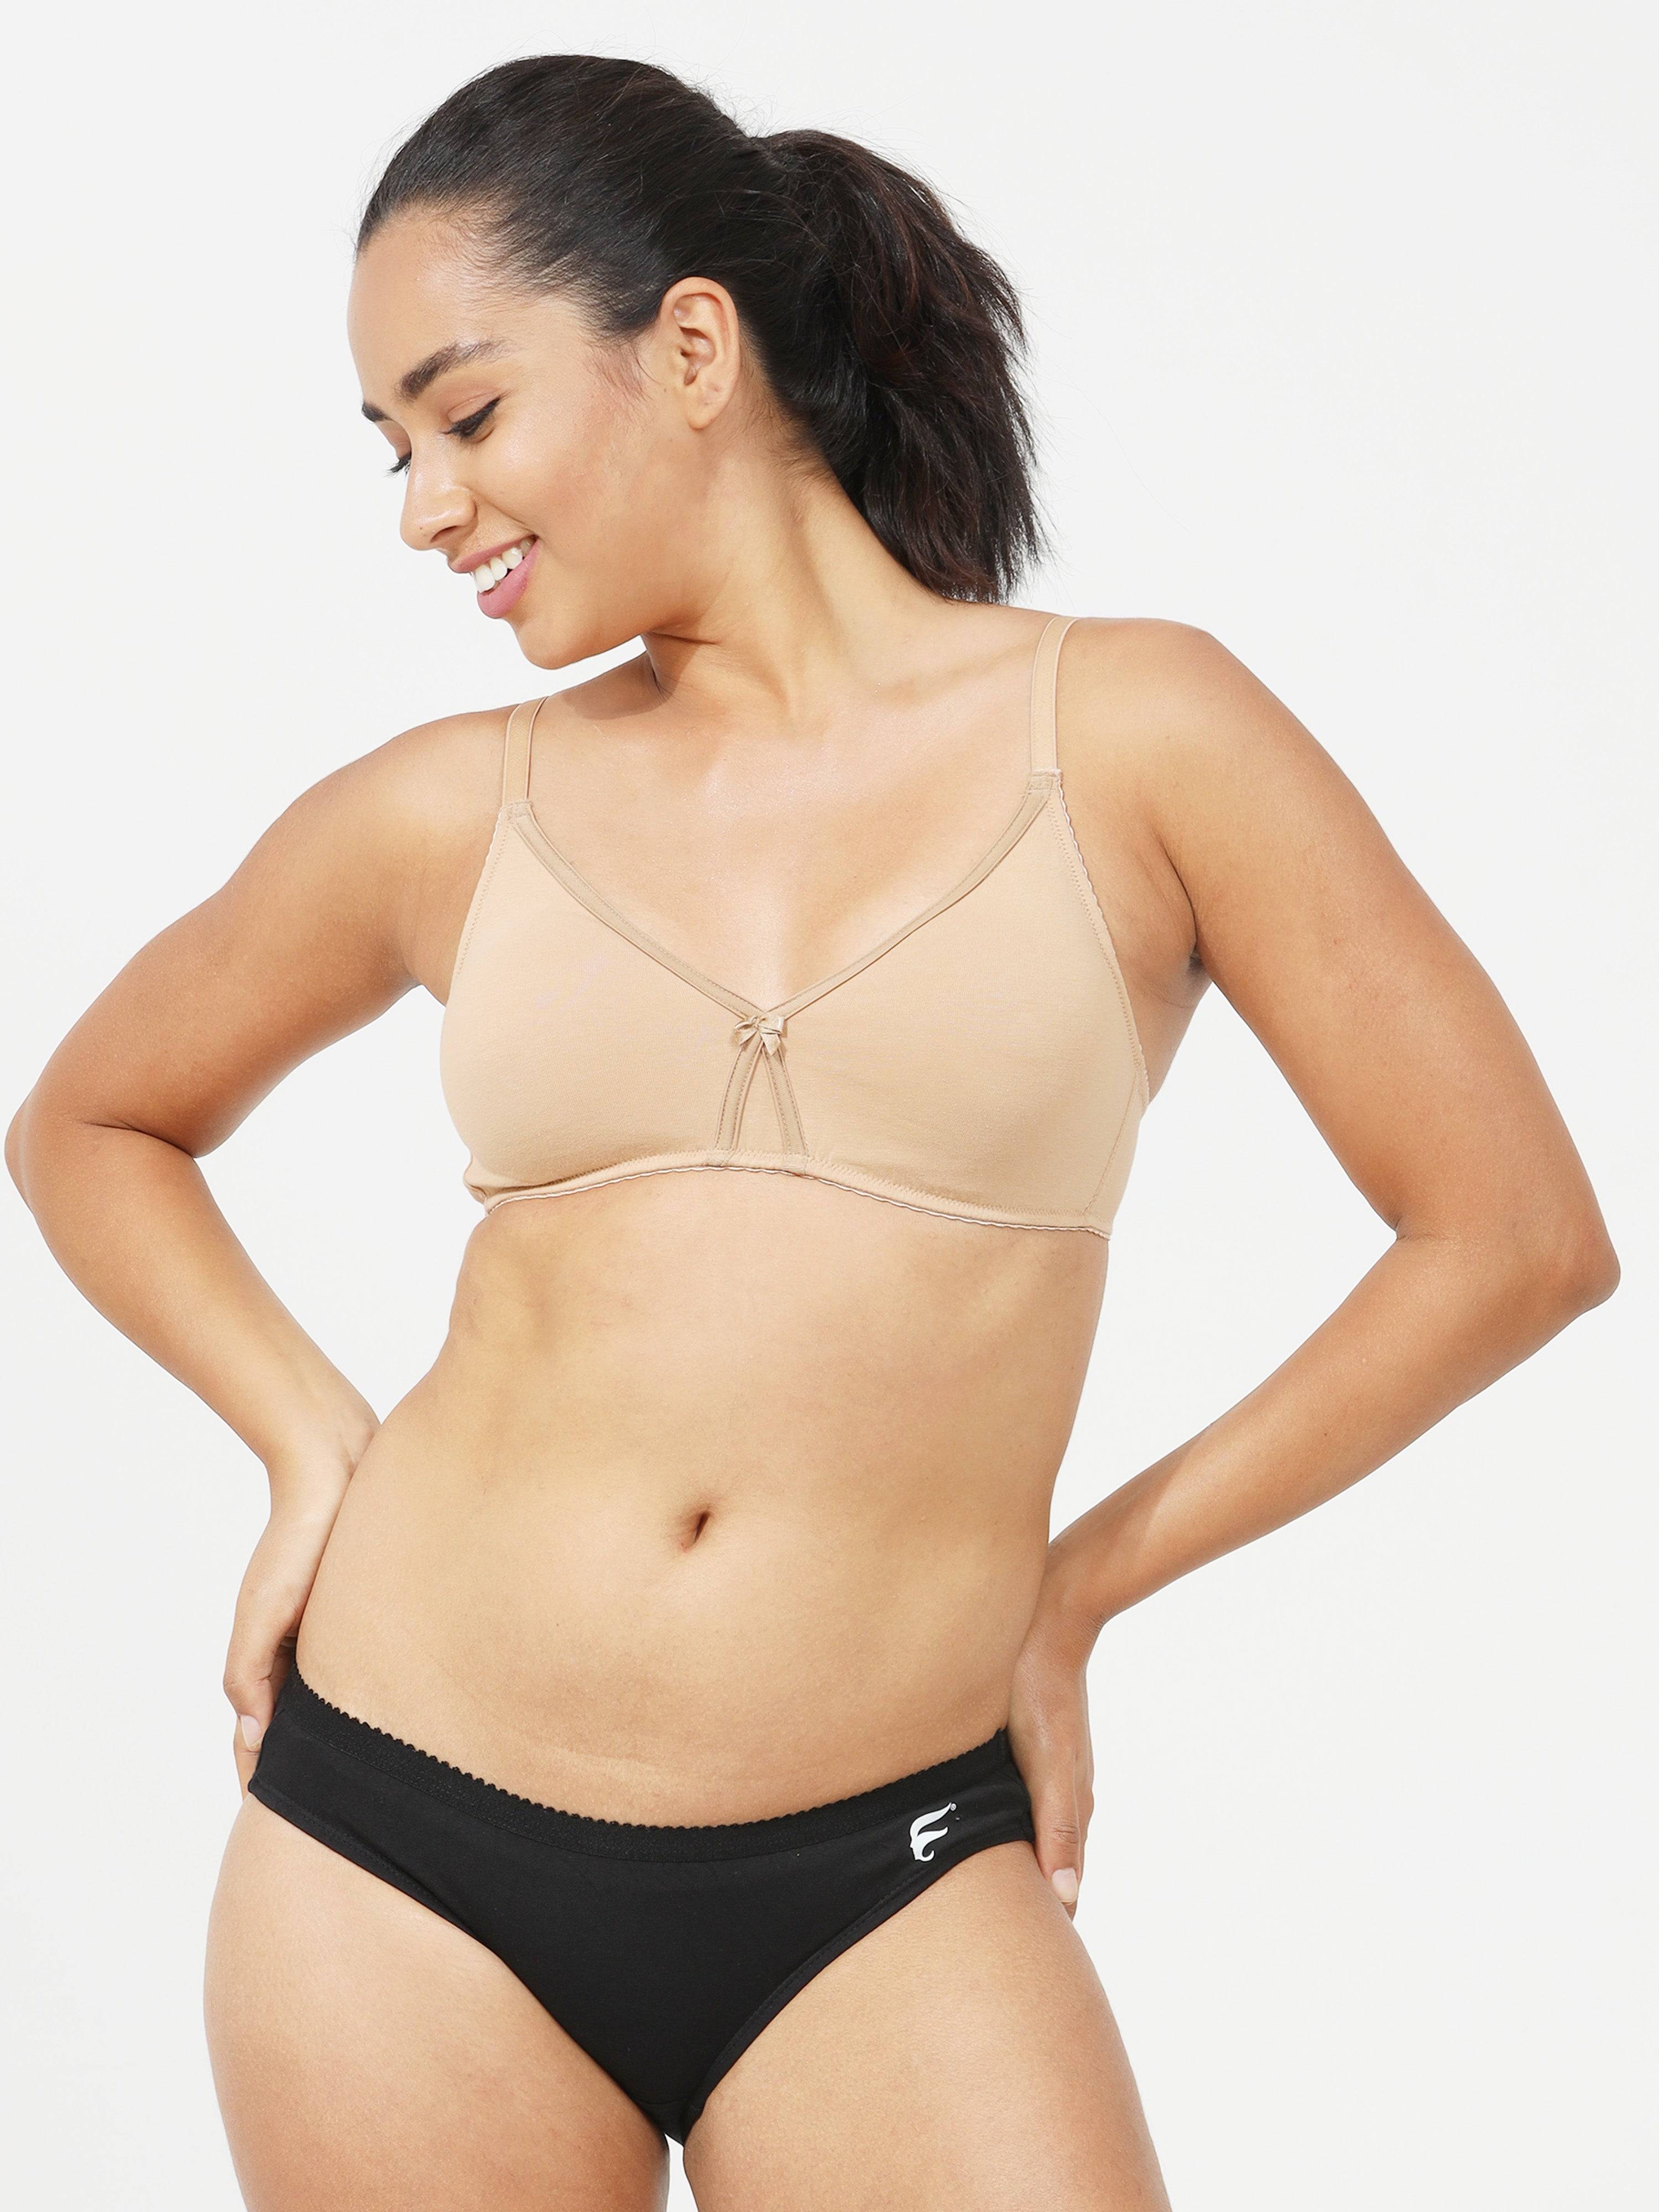 Non-padded, double layered cups for support and nipple coverage Bra